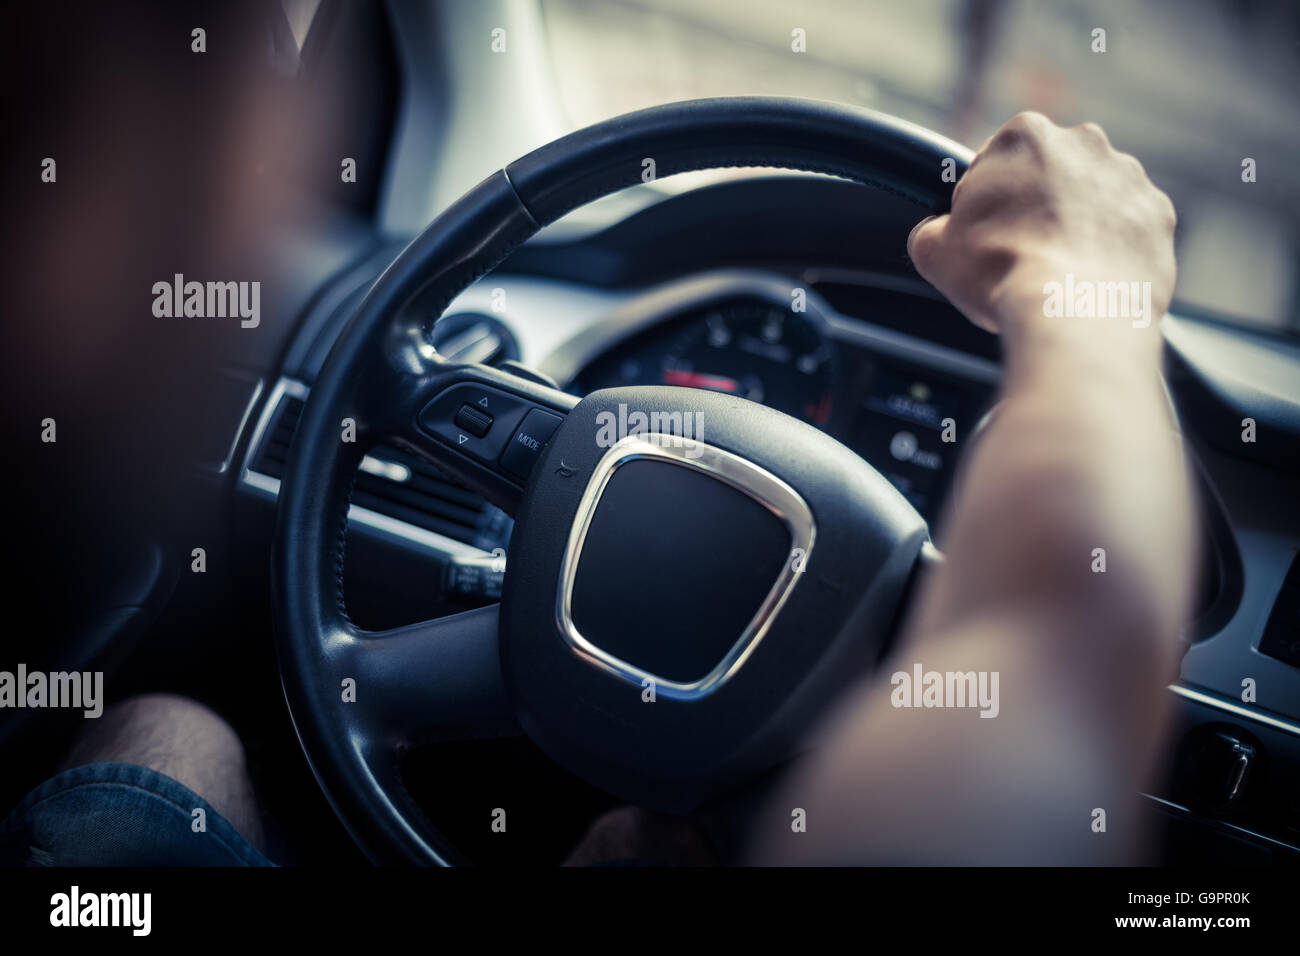 Close up shot of a man's hands holding a car's steering wheel. Stock Photo